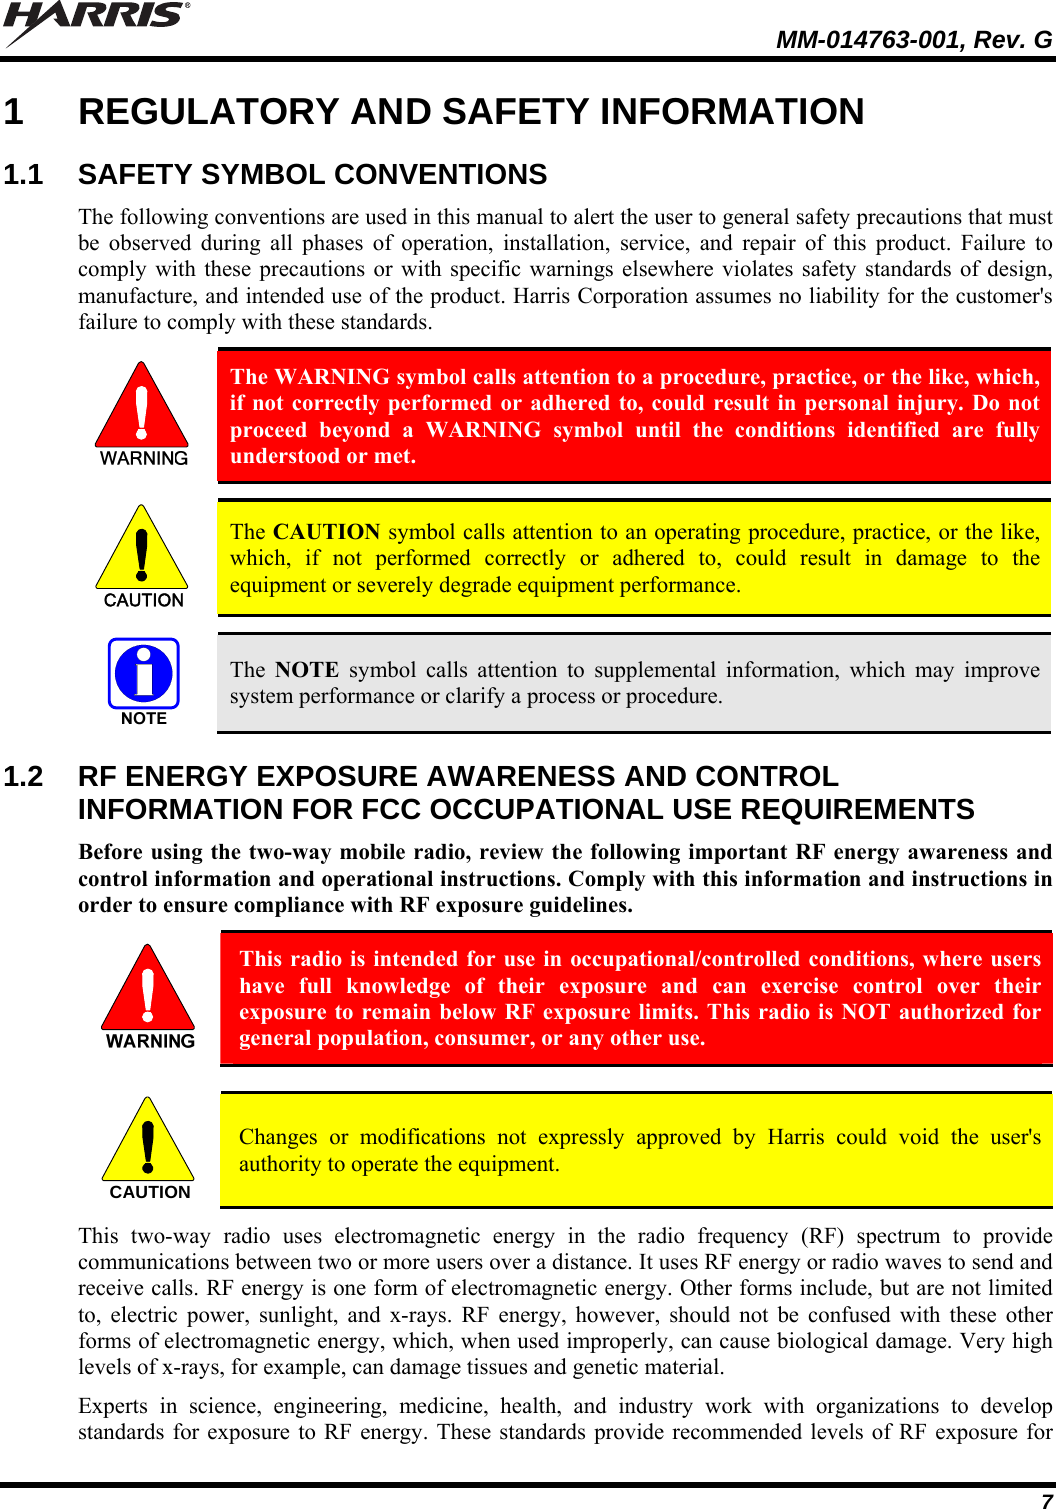   MM-014763-001, Rev. G 7 1  REGULATORY AND SAFETY INFORMATION 1.1  SAFETY SYMBOL CONVENTIONS The following conventions are used in this manual to alert the user to general safety precautions that must be observed during all phases of operation, installation, service, and repair of this product. Failure to comply with these precautions or with specific warnings elsewhere violates safety standards of design, manufacture, and intended use of the product. Harris Corporation assumes no liability for the customer&apos;s failure to comply with these standards.  The WARNING symbol calls attention to a procedure, practice, or the like, which, if not correctly performed or adhered to, could result in personal injury. Do not proceed beyond a WARNING symbol until the conditions identified are fully understood or met.   CAUTION  The CAUTION symbol calls attention to an operating procedure, practice, or the like, which, if not performed correctly or adhered to, could result in damage to the equipment or severely degrade equipment performance.    The  NOTE symbol calls attention to supplemental information, which may improve system performance or clarify a process or procedure. 1.2  RF ENERGY EXPOSURE AWARENESS AND CONTROL INFORMATION FOR FCC OCCUPATIONAL USE REQUIREMENTS Before using the two-way mobile radio, review the following important RF energy awareness and control information and operational instructions. Comply with this information and instructions in order to ensure compliance with RF exposure guidelines.  This radio is intended for use in occupational/controlled conditions, where users have full knowledge of their exposure and can exercise control over their exposure to remain below RF exposure limits. This radio is NOT authorized for general population, consumer, or any other use.  CAUTION  Changes or modifications not expressly approved by Harris could void the user&apos;s authority to operate the equipment. This two-way radio uses electromagnetic energy in the radio frequency (RF) spectrum to provide communications between two or more users over a distance. It uses RF energy or radio waves to send and receive calls. RF energy is one form of electromagnetic energy. Other forms include, but are not limited to, electric power, sunlight, and x-rays. RF energy, however, should not be confused with these other forms of electromagnetic energy, which, when used improperly, can cause biological damage. Very high levels of x-rays, for example, can damage tissues and genetic material. Experts in science, engineering, medicine, health, and industry work with organizations to develop standards for exposure to RF energy. These standards provide recommended levels of RF exposure for 